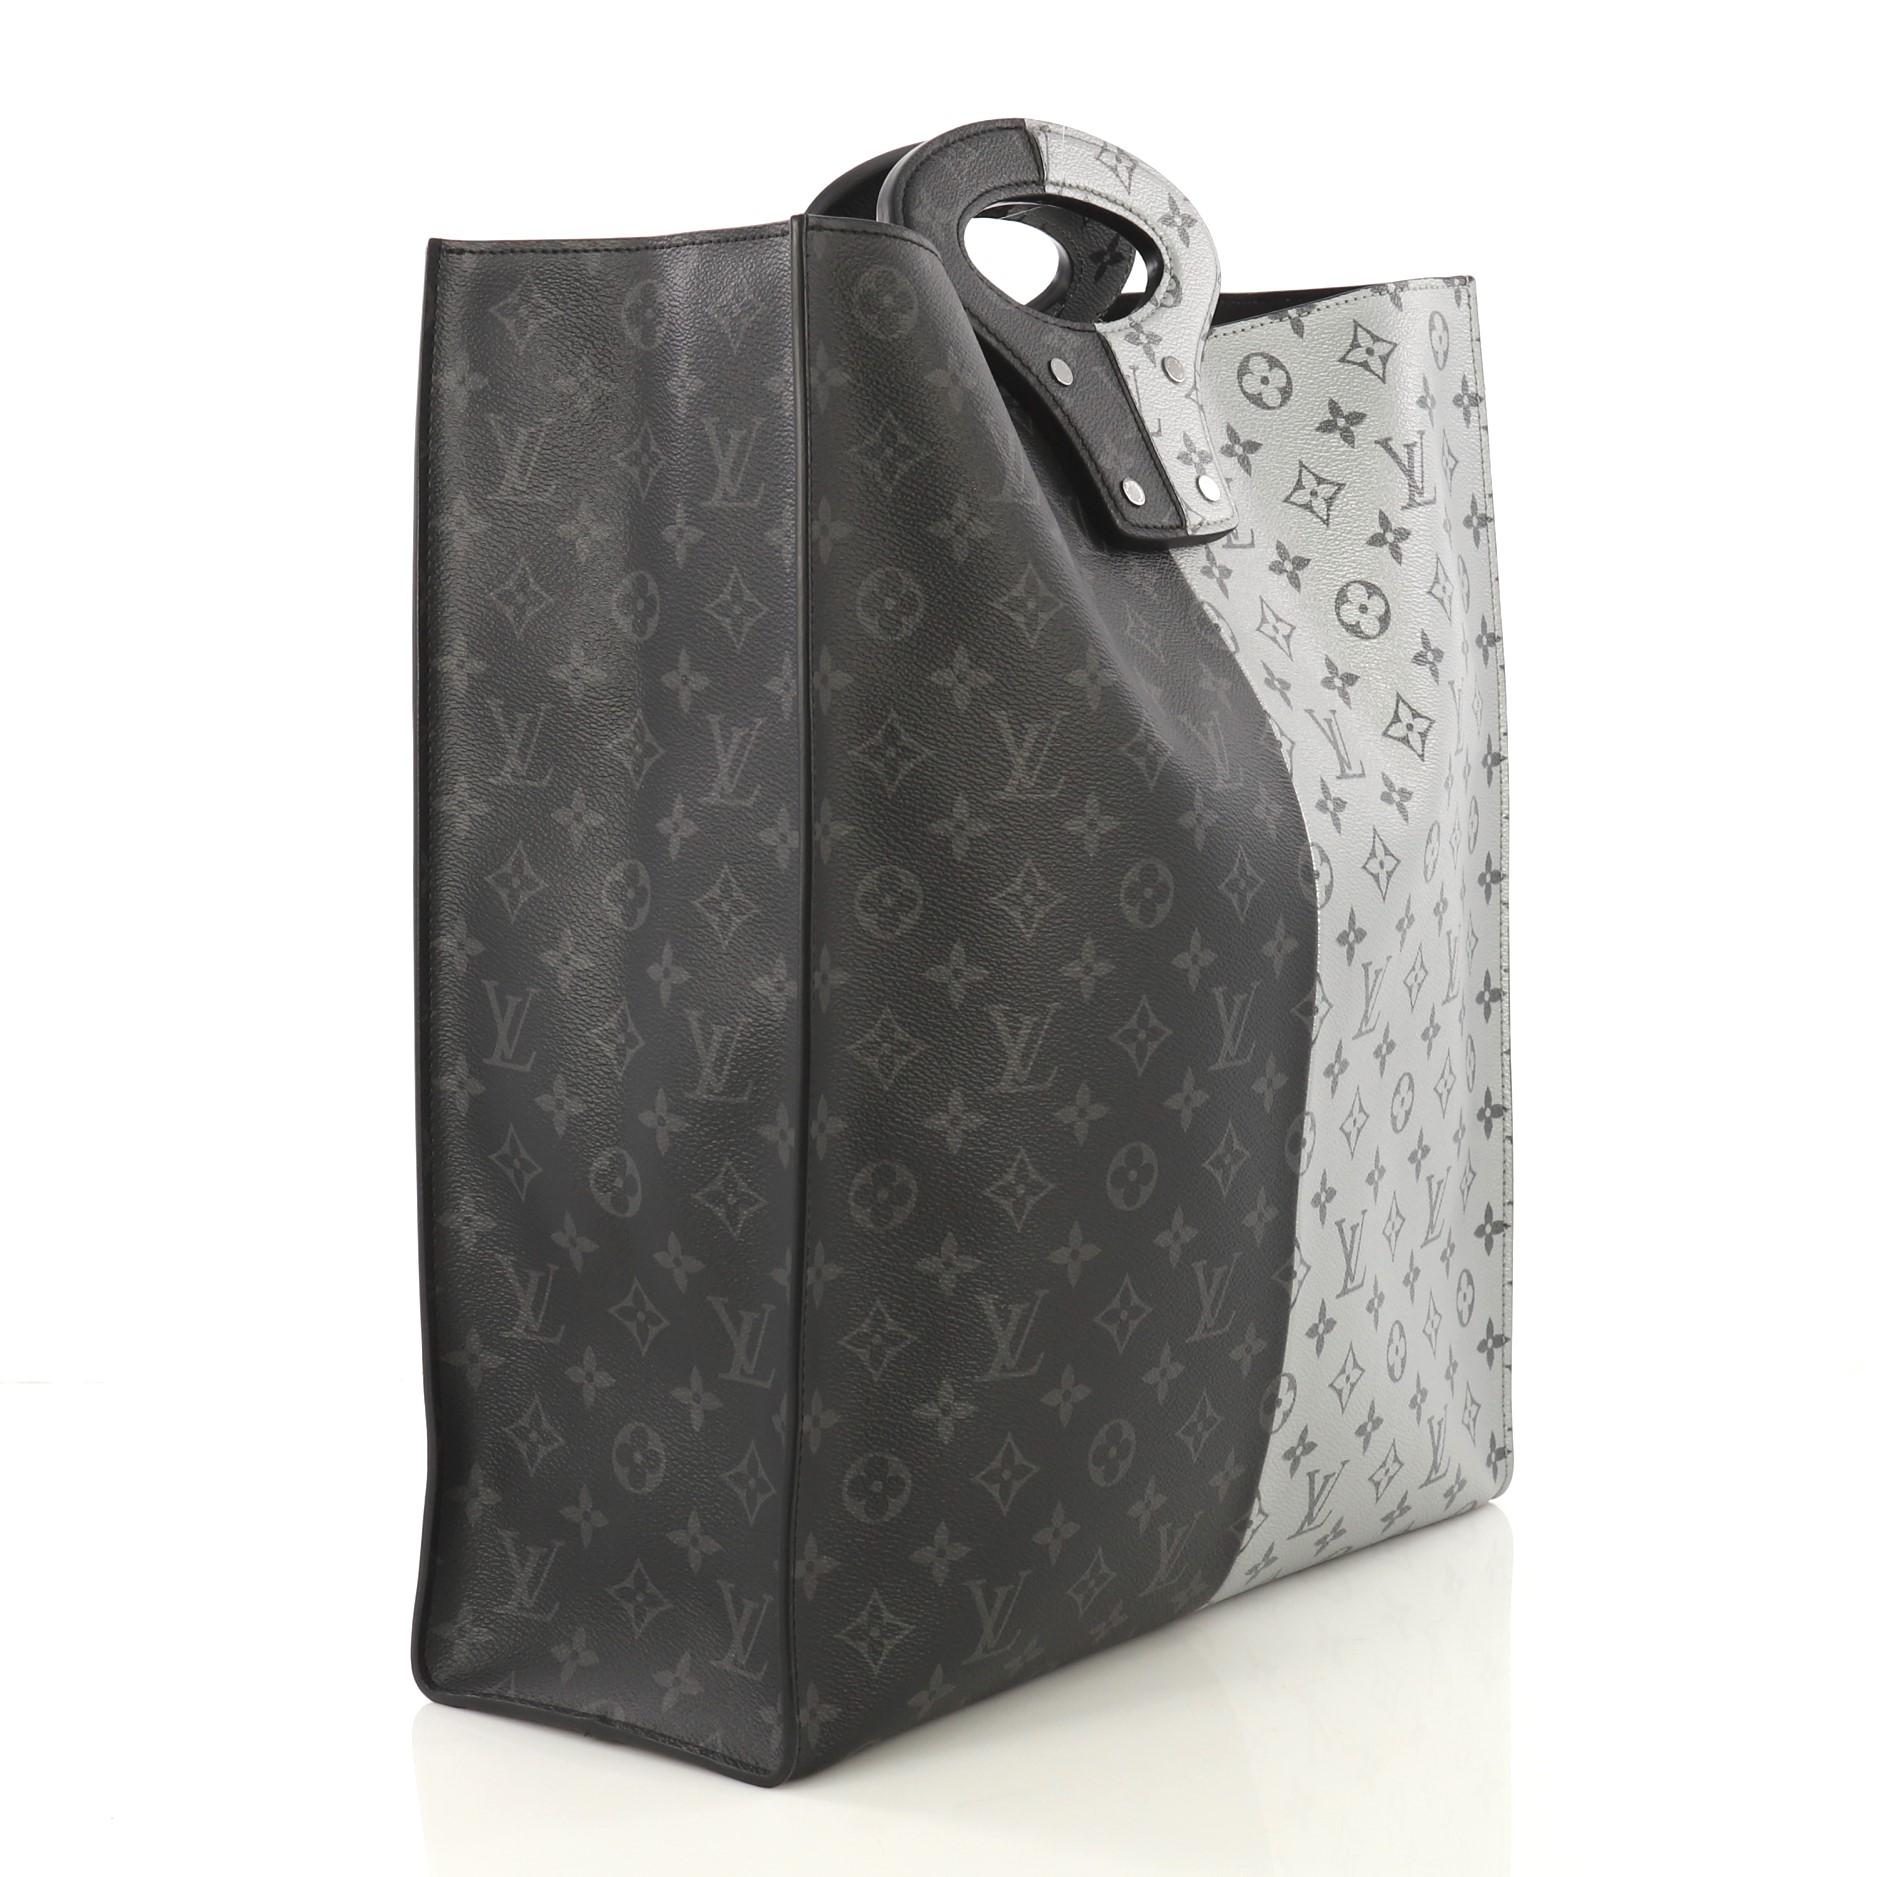 This Louis Vuitton North South Tote Monogram Eclipse Split Canvas, crafted from silver and black monogram eclipse split coated canvas, features dual top handles and gunmetal-tone hardware. It opens to a black microfiber interior with zip pocket.